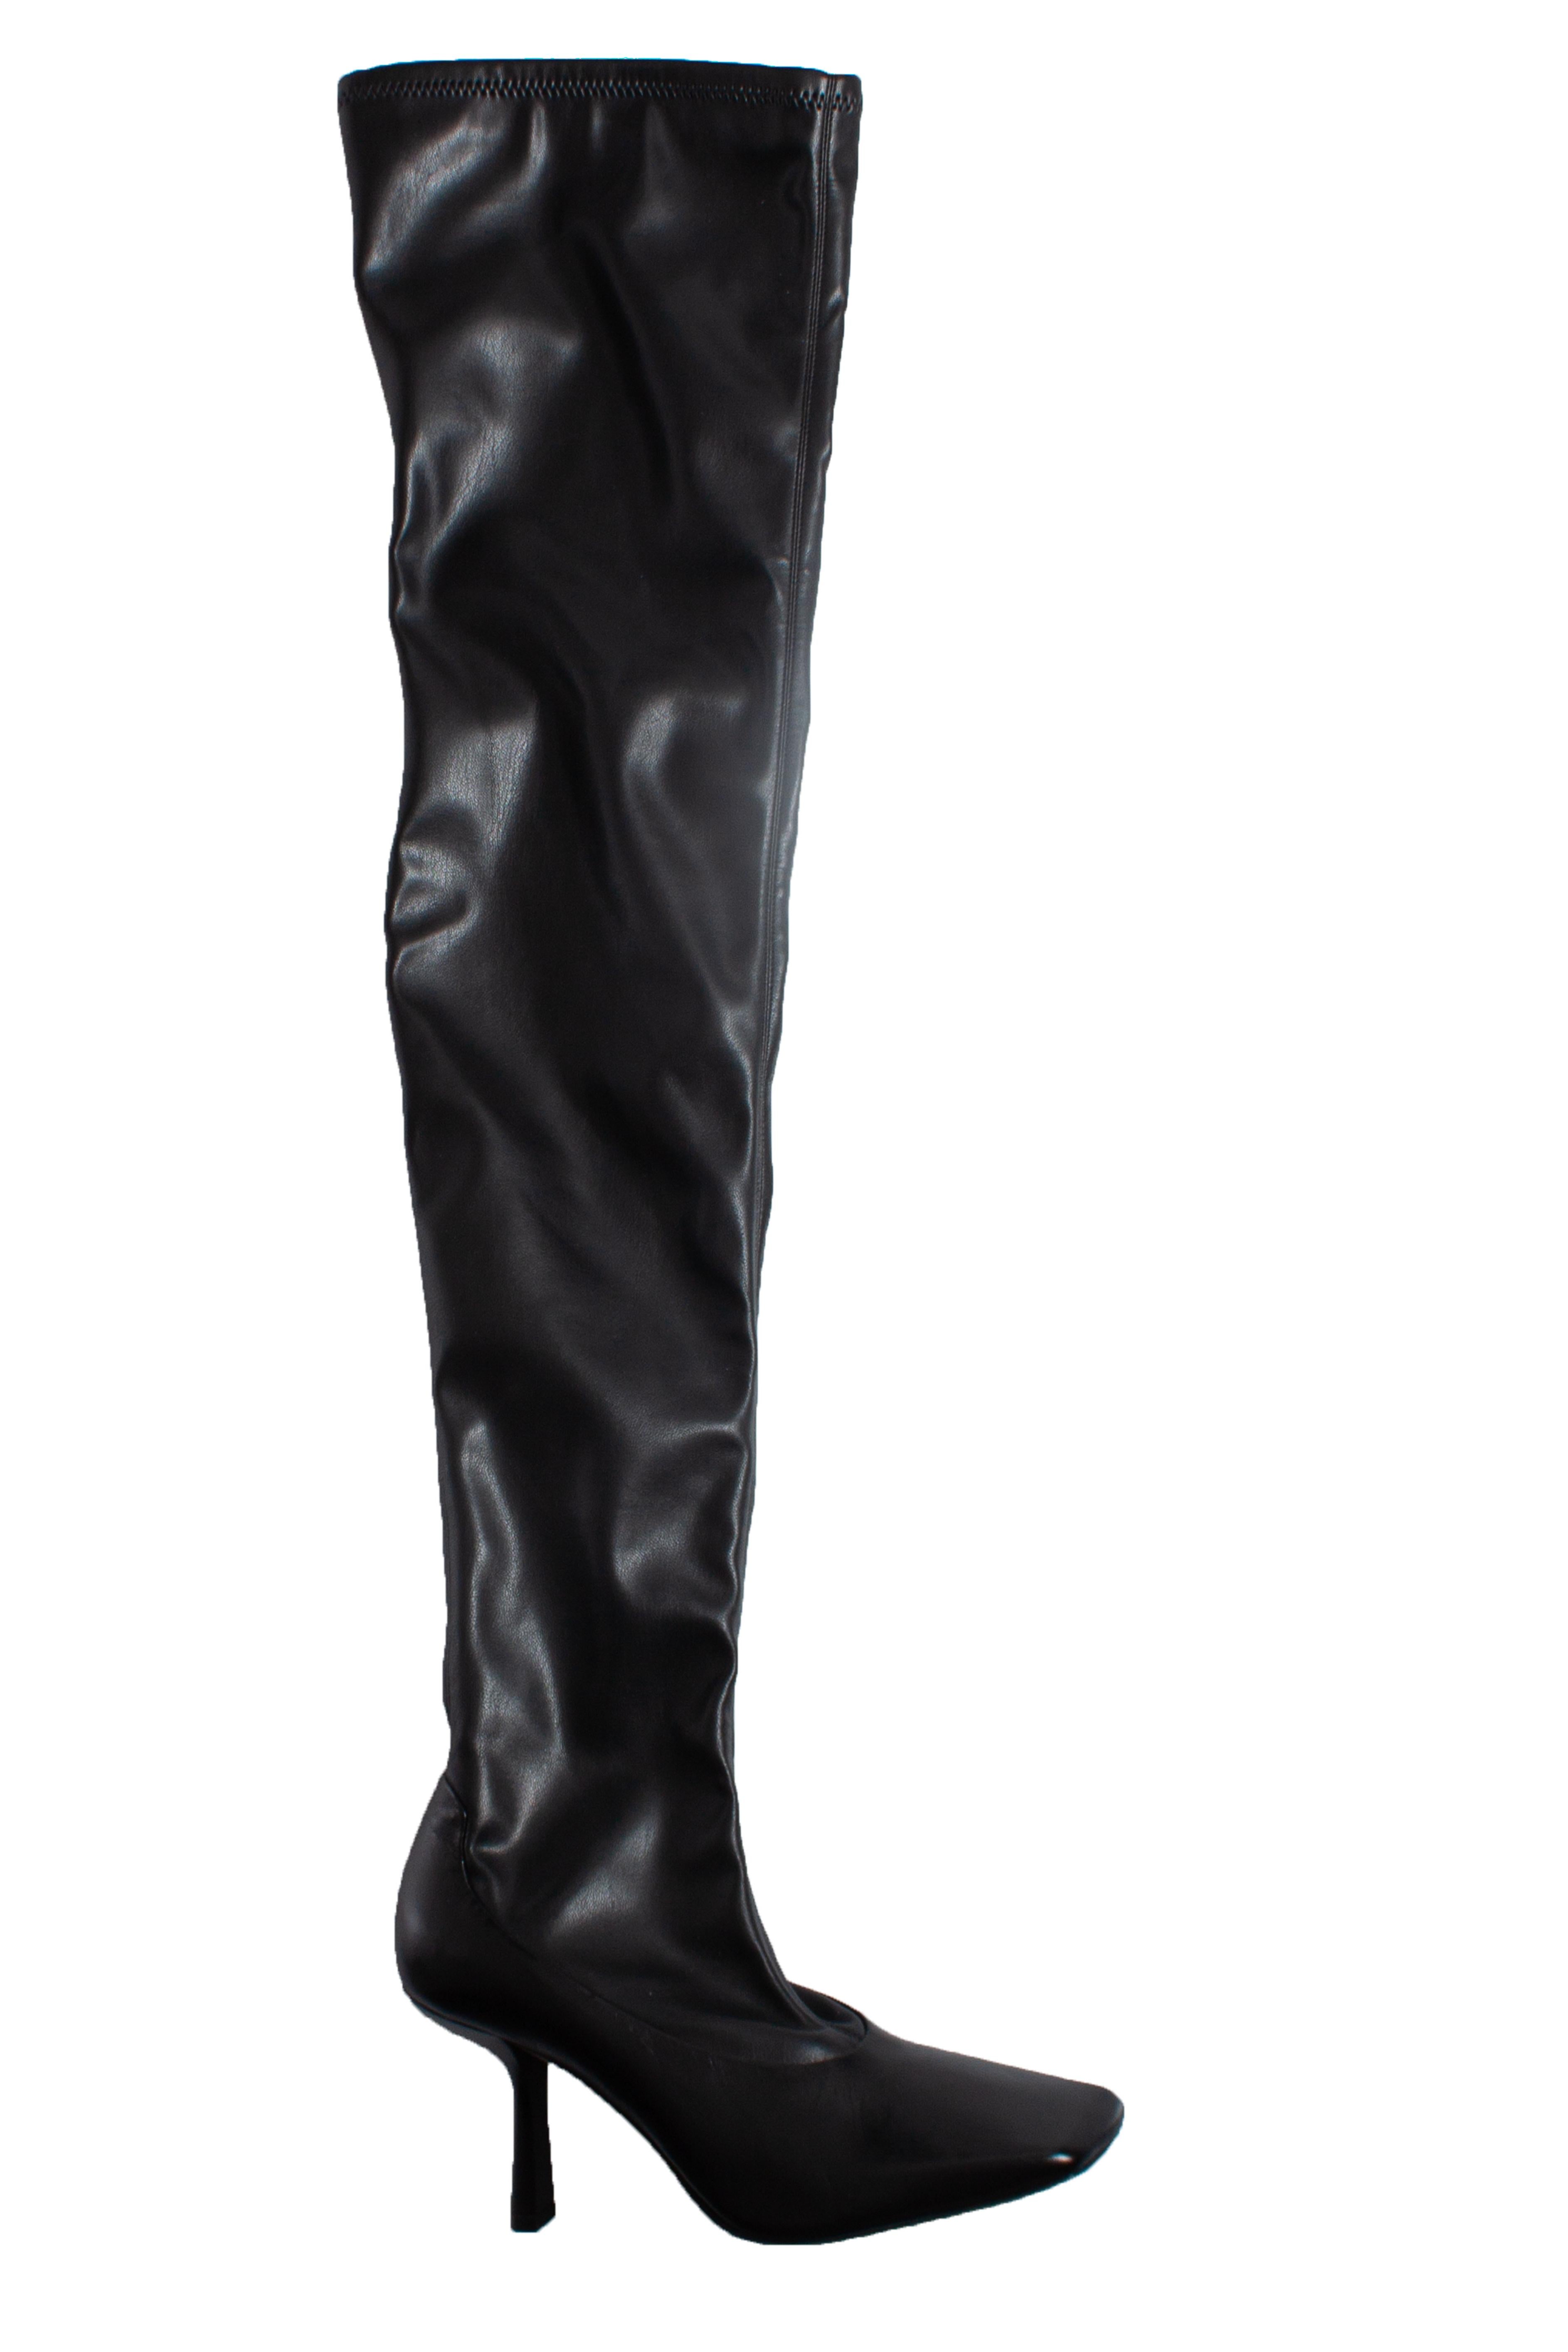 Jimmy Choo, MIRE overknee boots in leather. The item is new - unworn.

• CONDITION: new - unworn 

• SIZE: 38.5

• INSOLE MEASUREMENTS: 25 cm

• HEEL MEASUREMENTS: 9 cm 

• SHAFT HEIGHT: 66 cm WIDTH TOP: 20 cm

• FABRIC: leather (stretch)

• COLOUR: